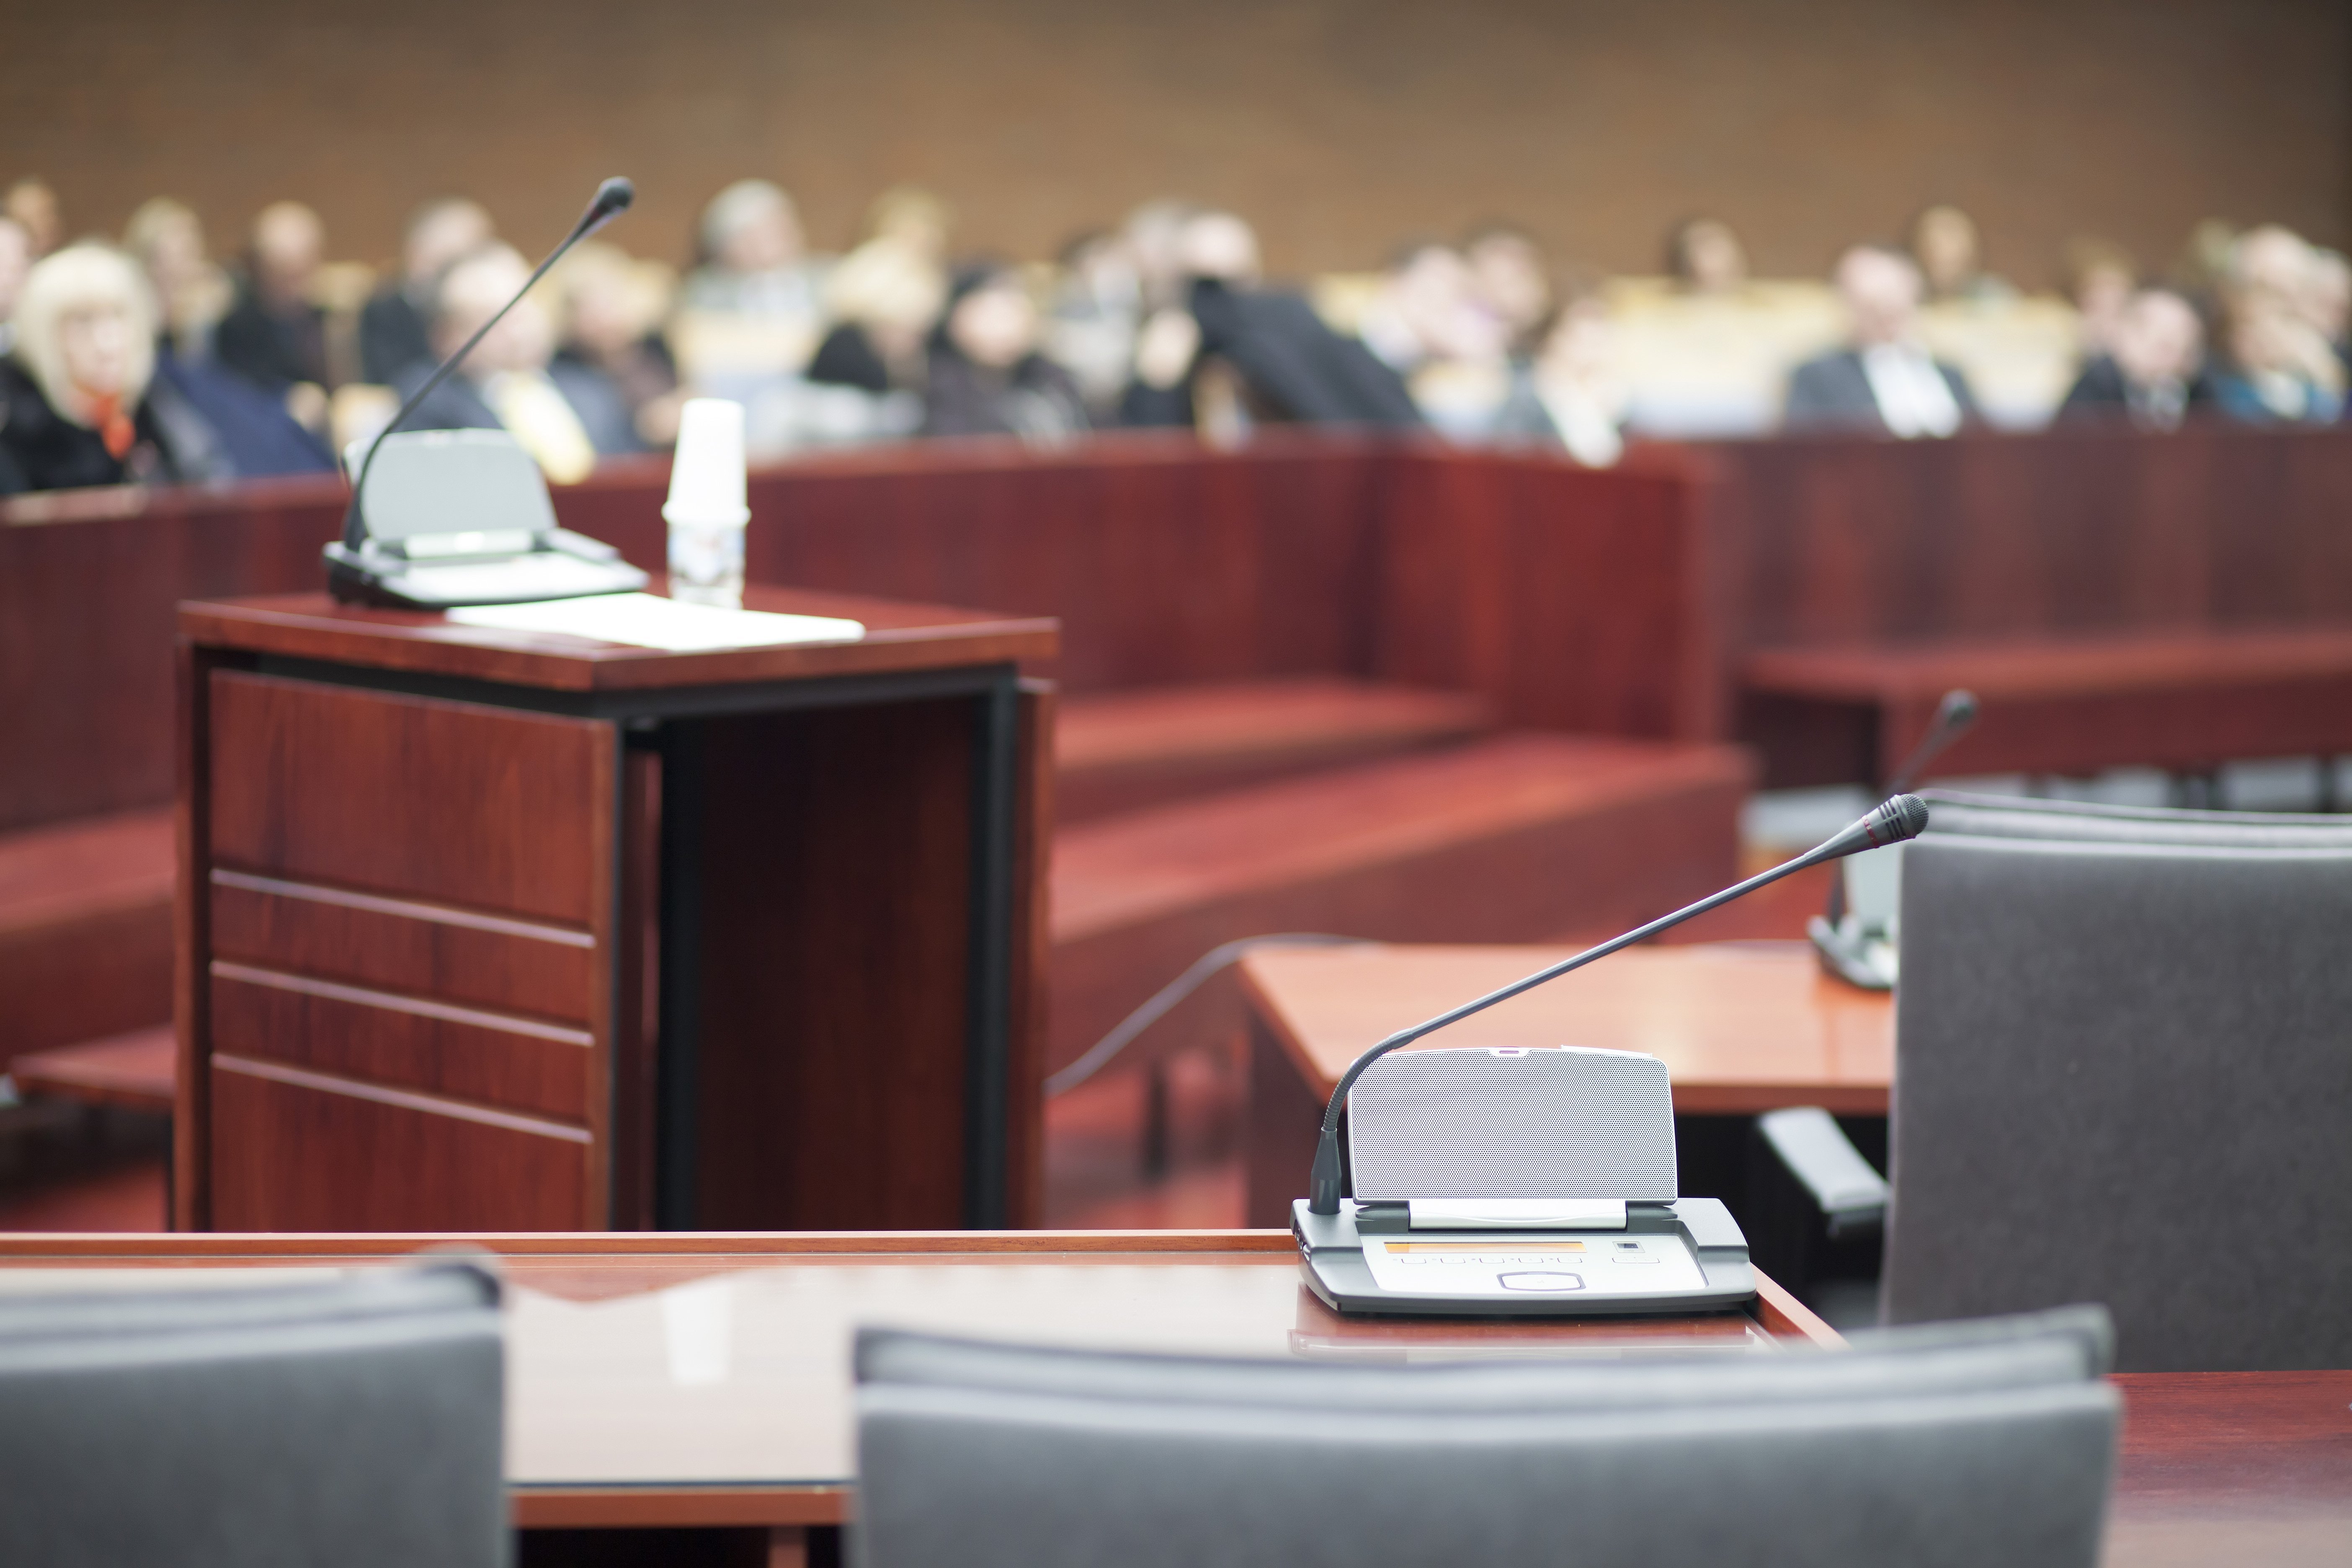 Witness stand in court. Image credit: Pixabay